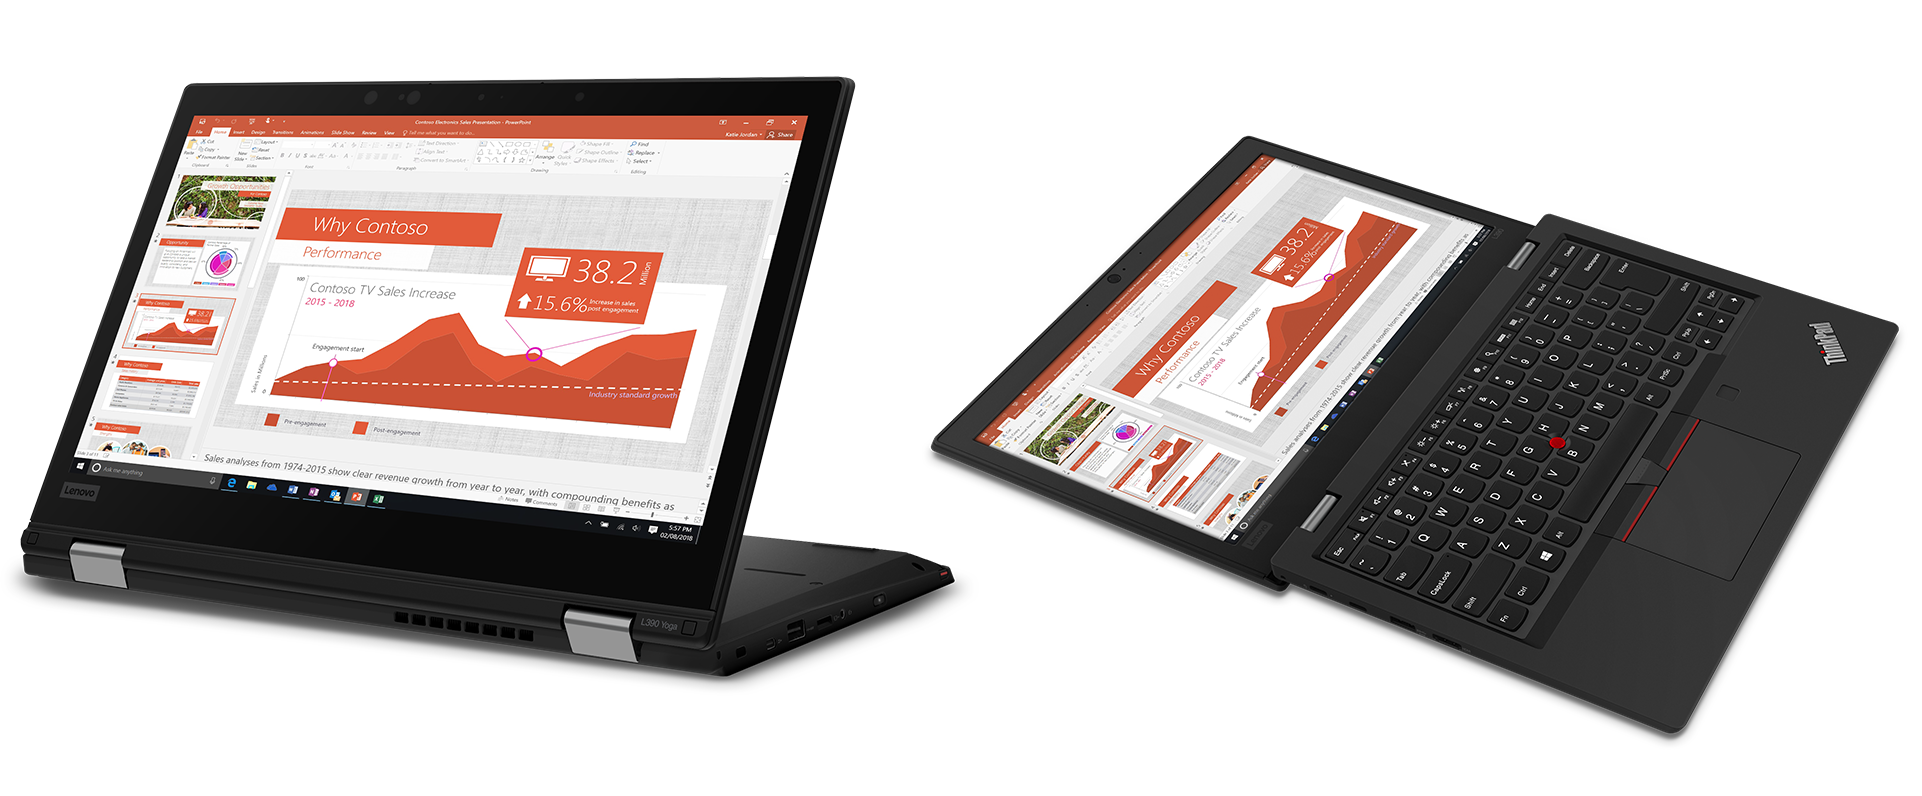 Lenovo Thinkpad Yoga 11S refuses to connect to internet Lenovo-side-by-side.png